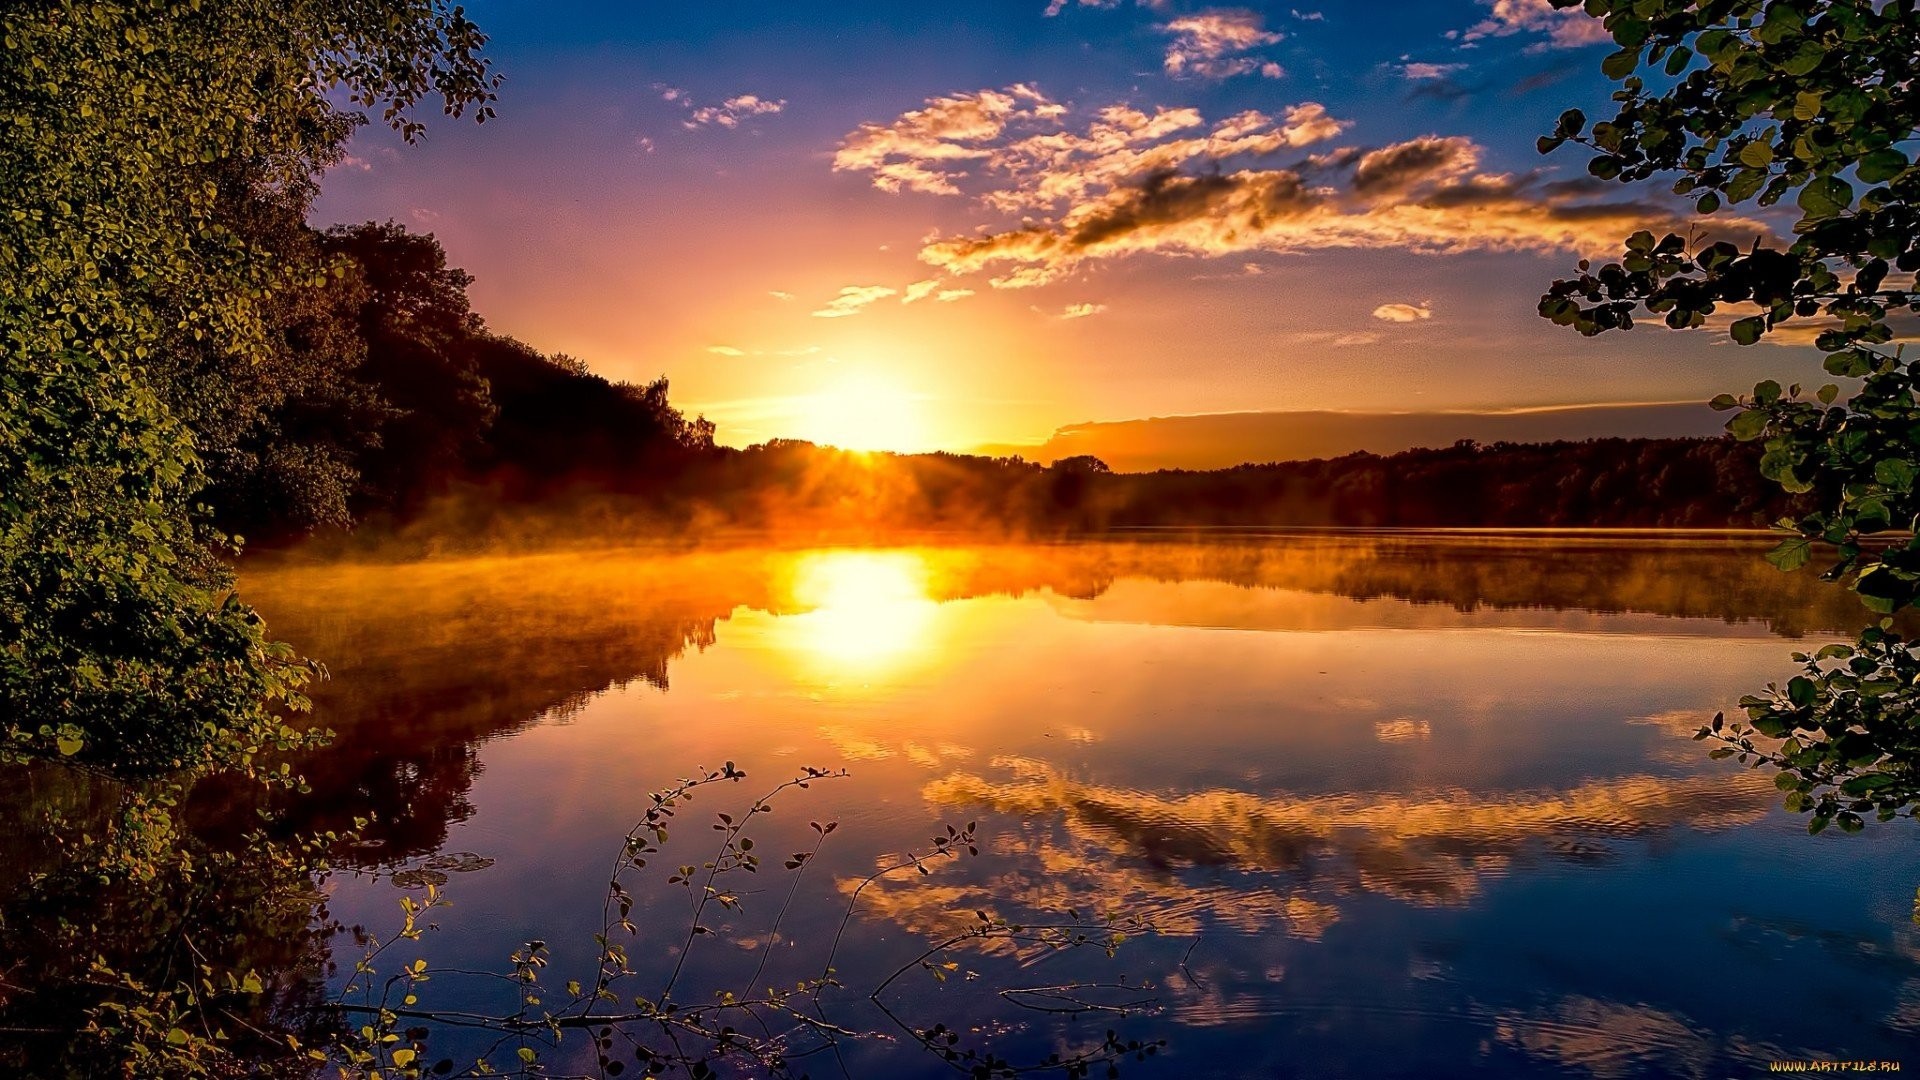 Reflection Sunset Lake Sunrise Nature Background Pictures Free Download 1920x1080 1920x1080